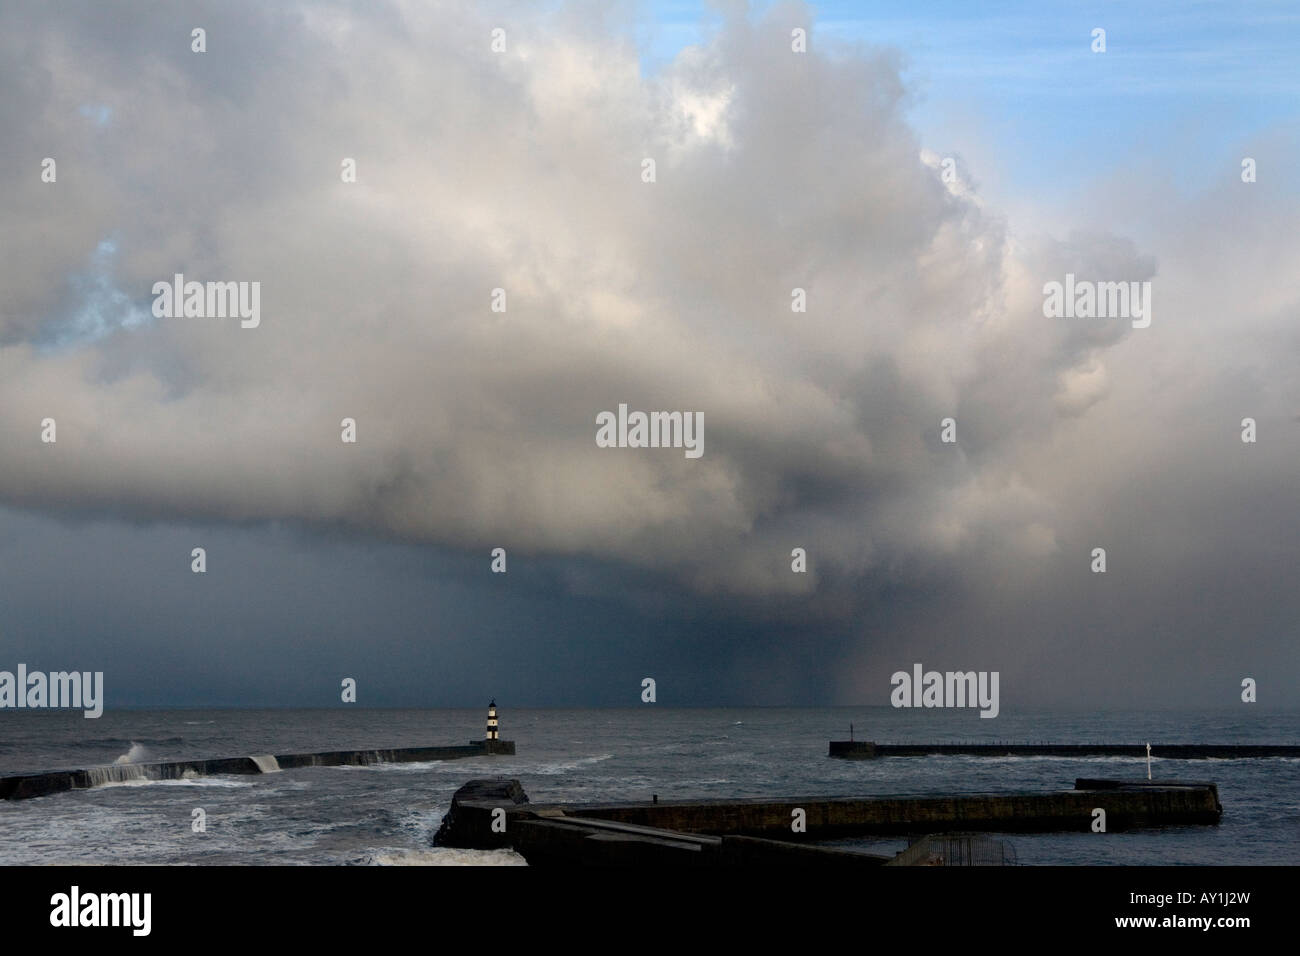 A snow storm over Seaham Pier and harbour in County Durham during a spring storm. England, UK Stock Photo